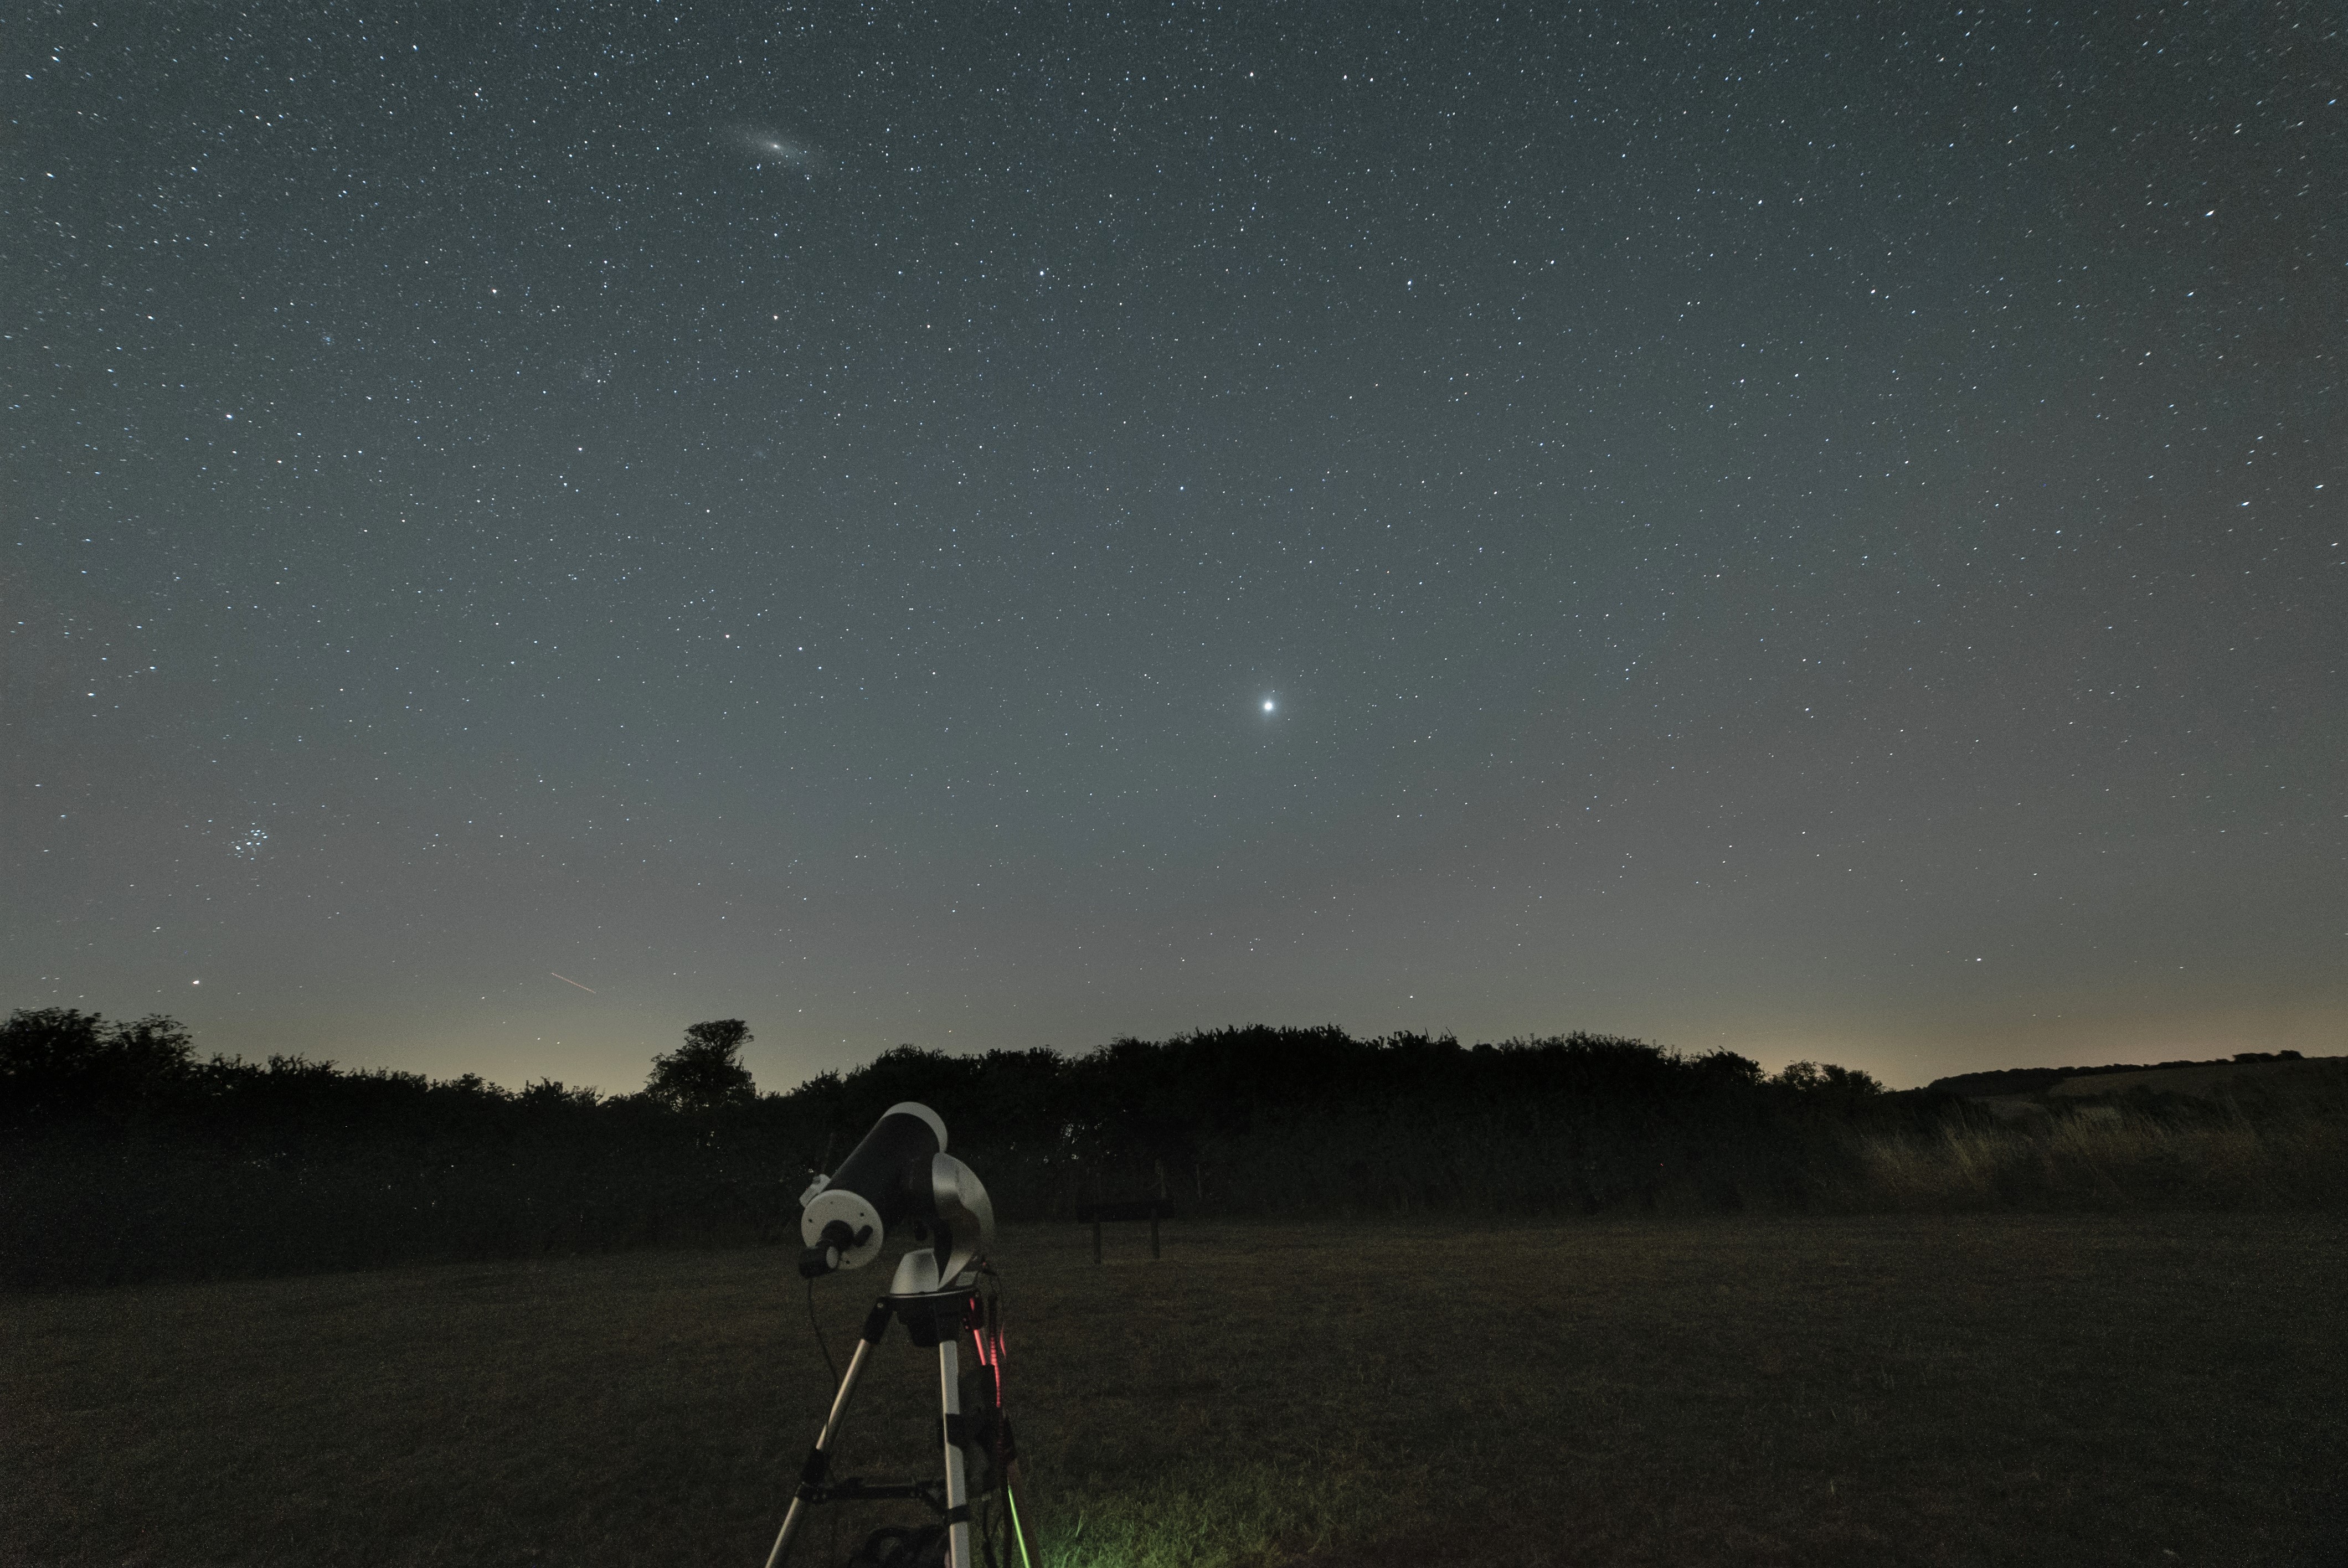 A telescope pointing at a bright object in the night sky.